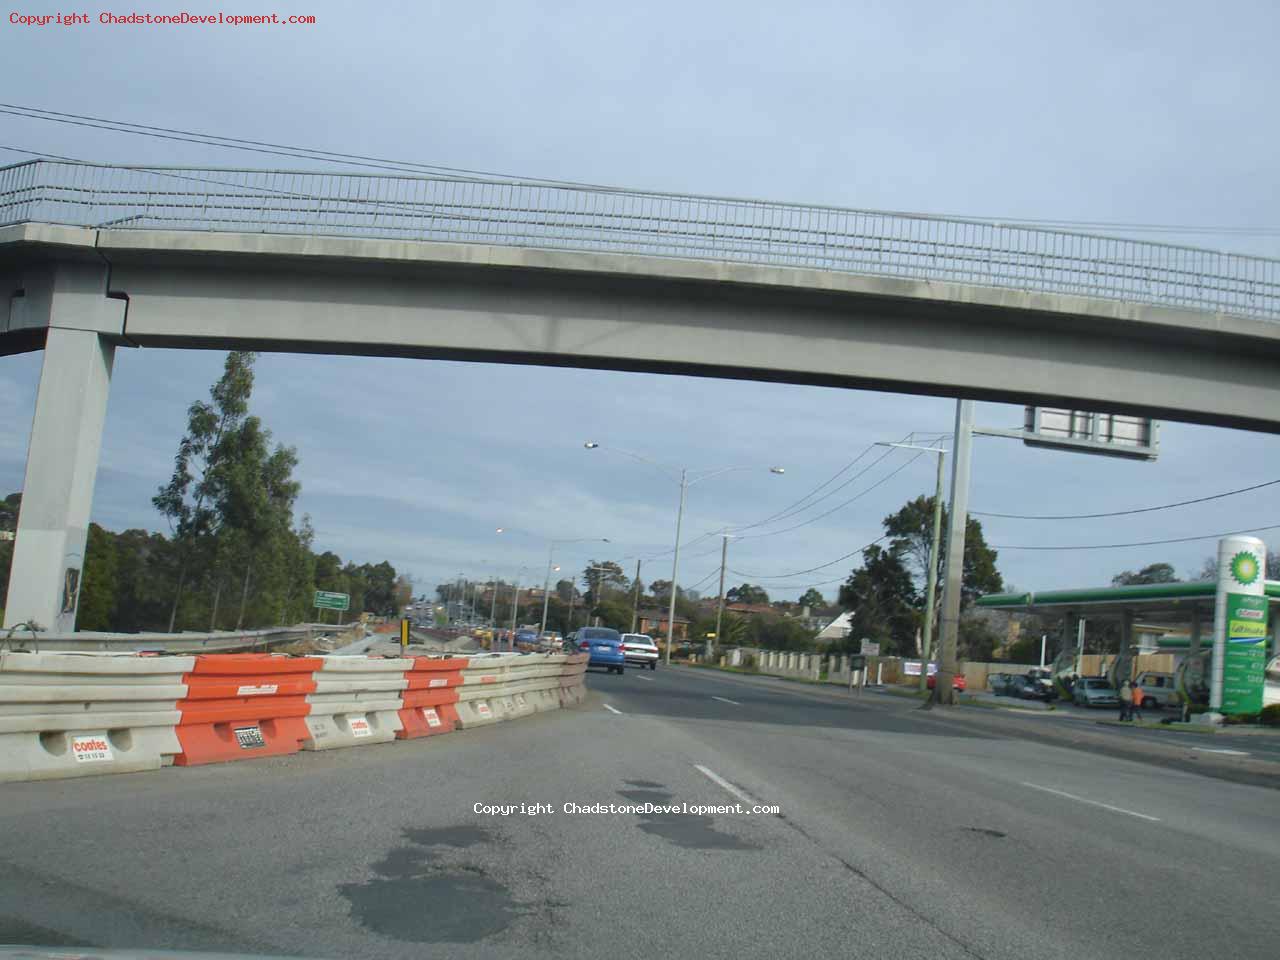 A view from the Monash fwy exit lane - Chadstone Development Discussions